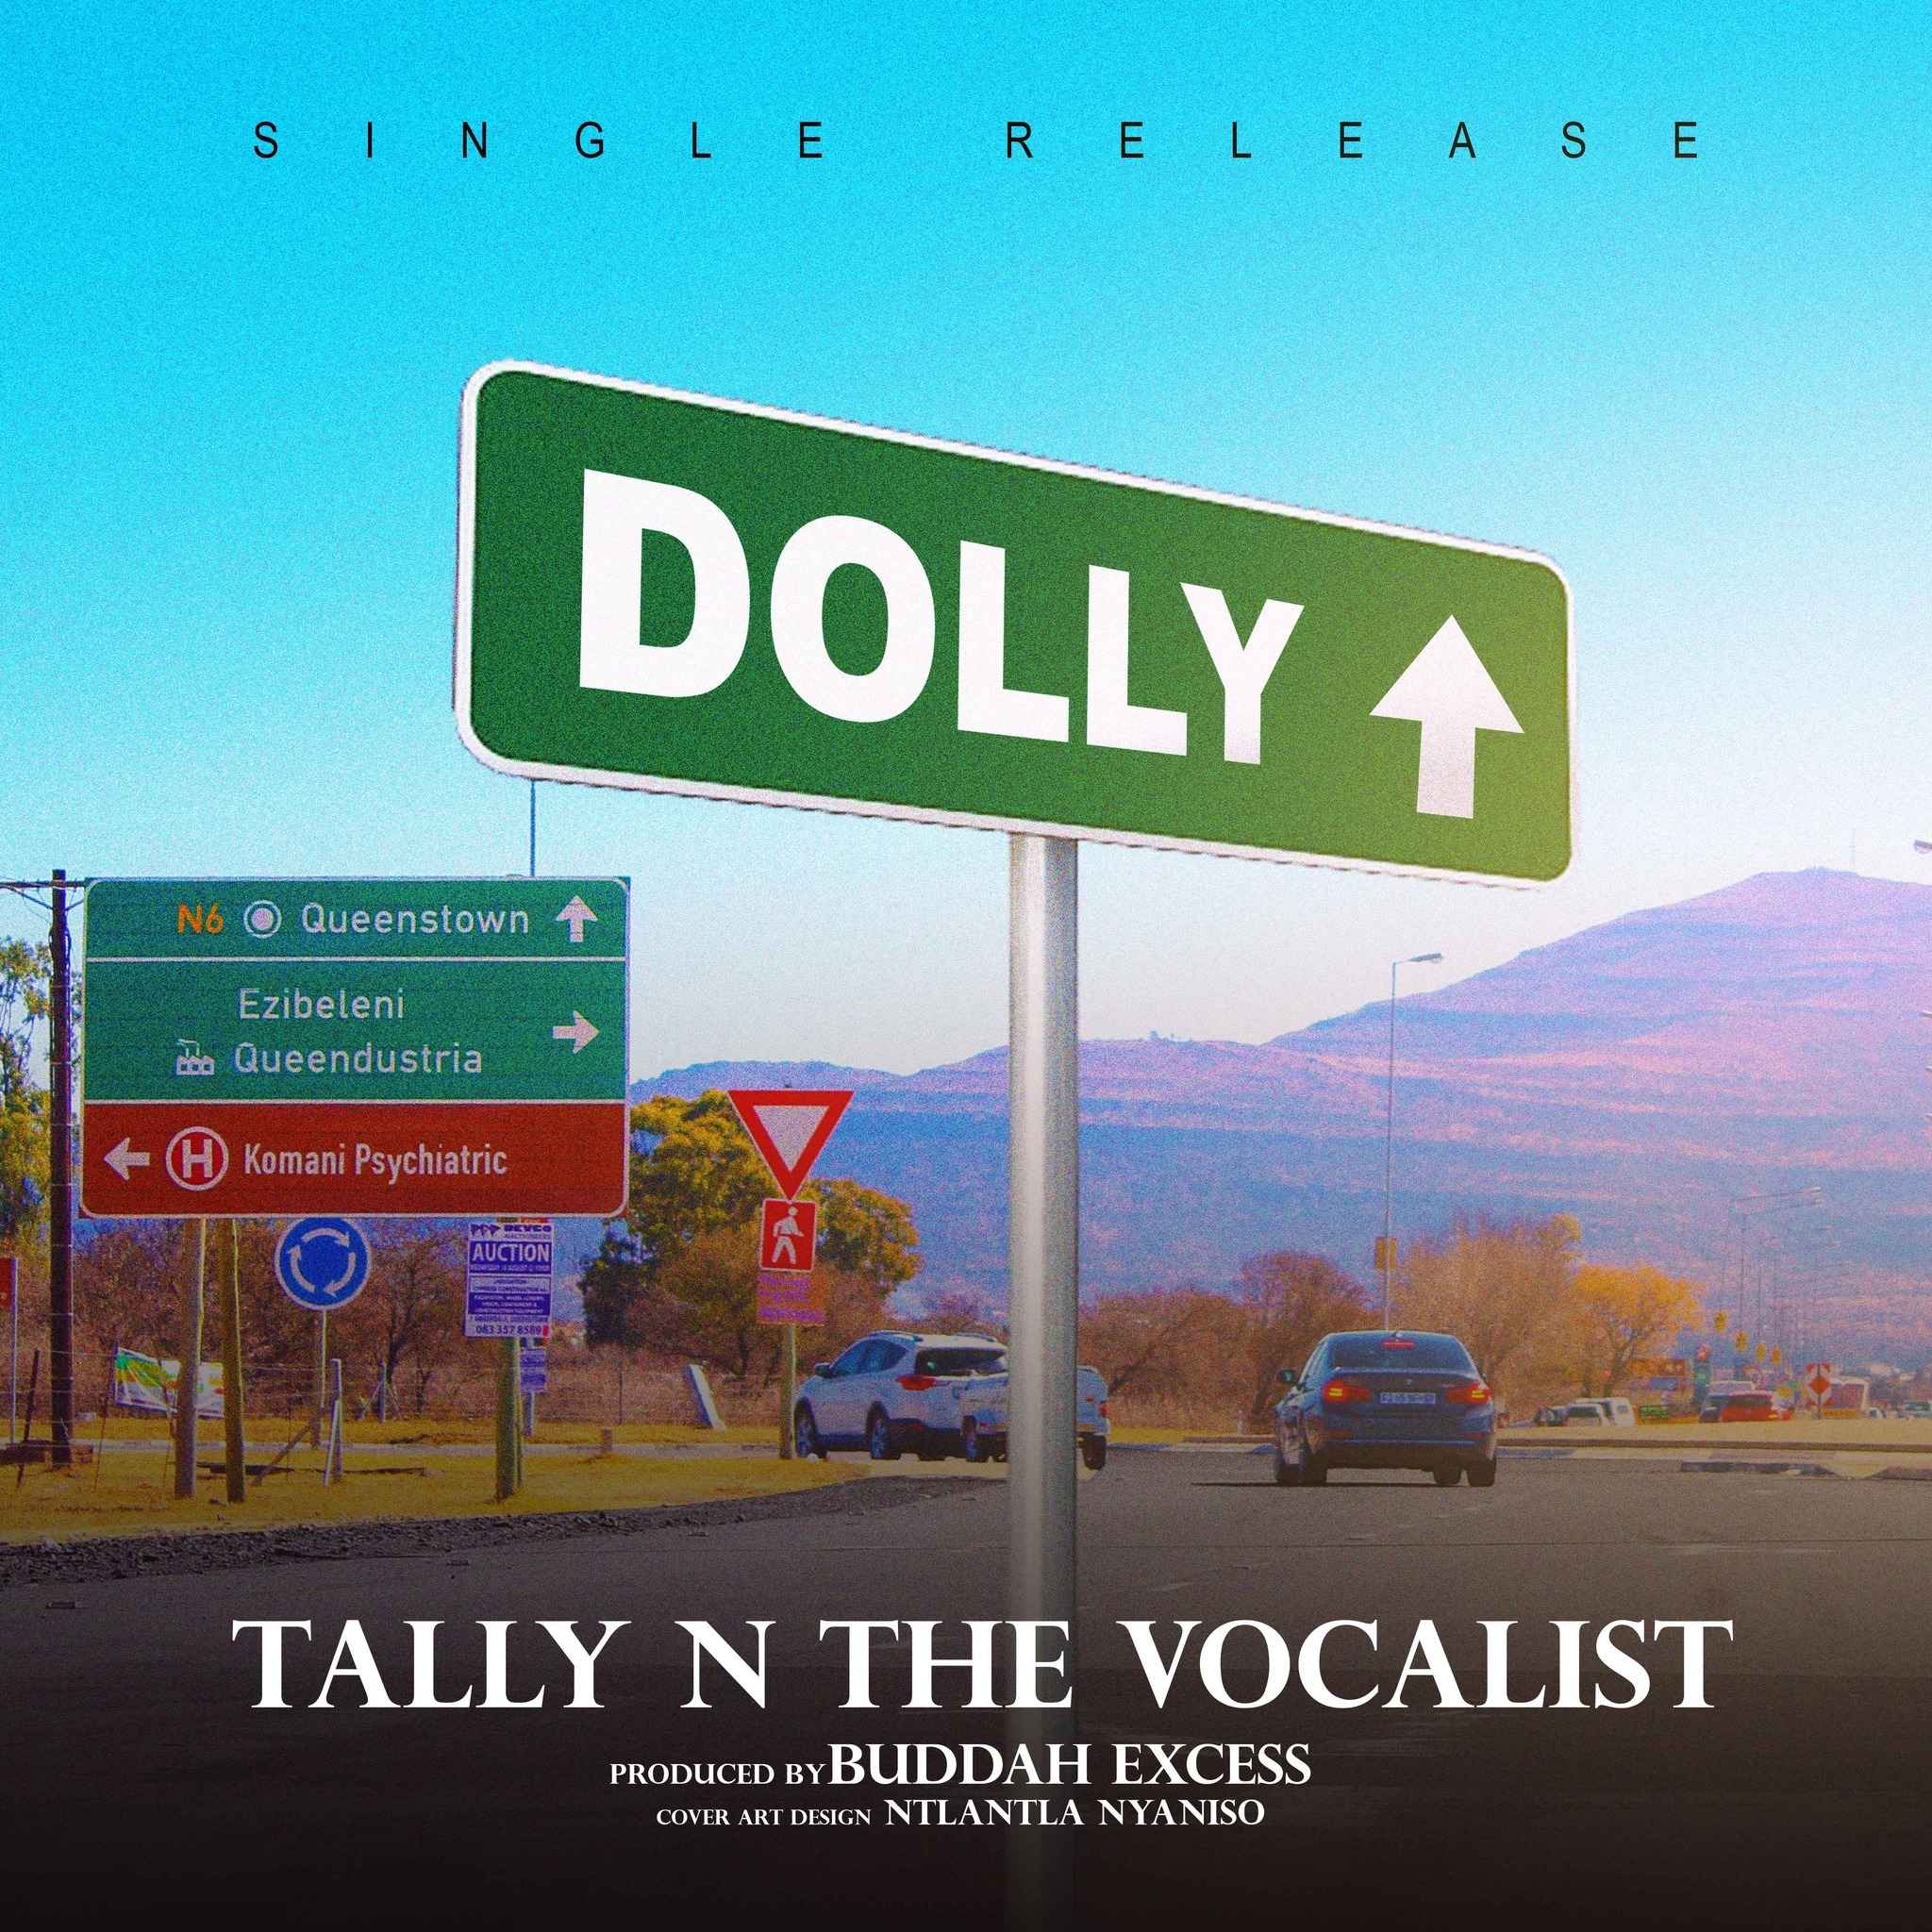 DOLLY - TALLY N THE VOCALIST